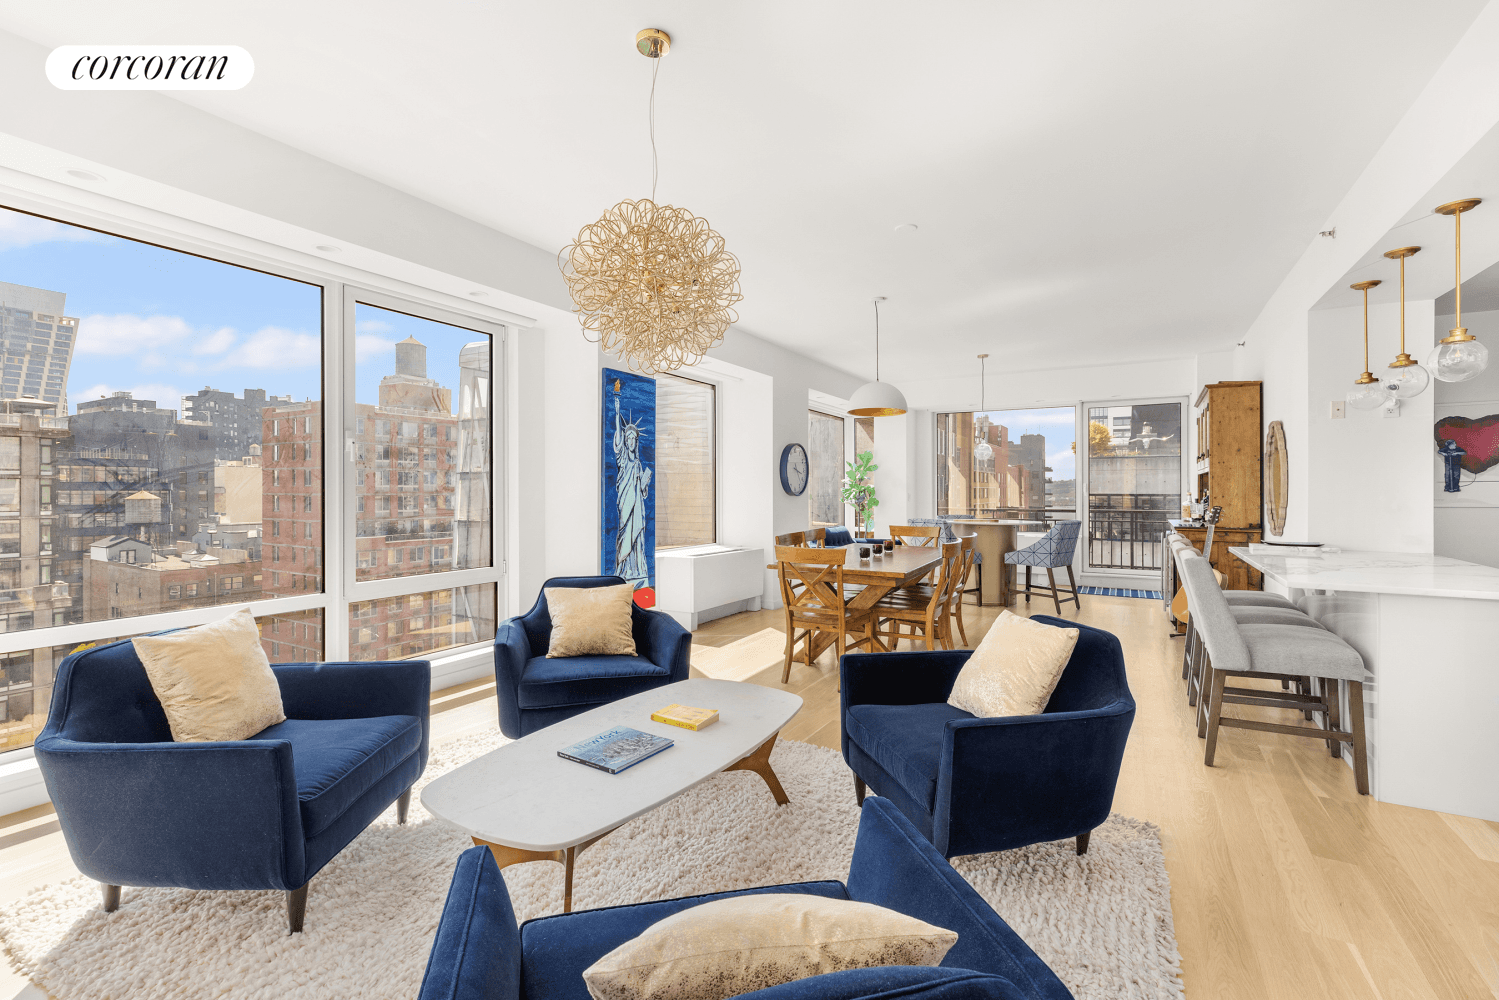 231 Tenth Avenue Penthouse Two is a 2600 square foot, 3 bedroom, 3.